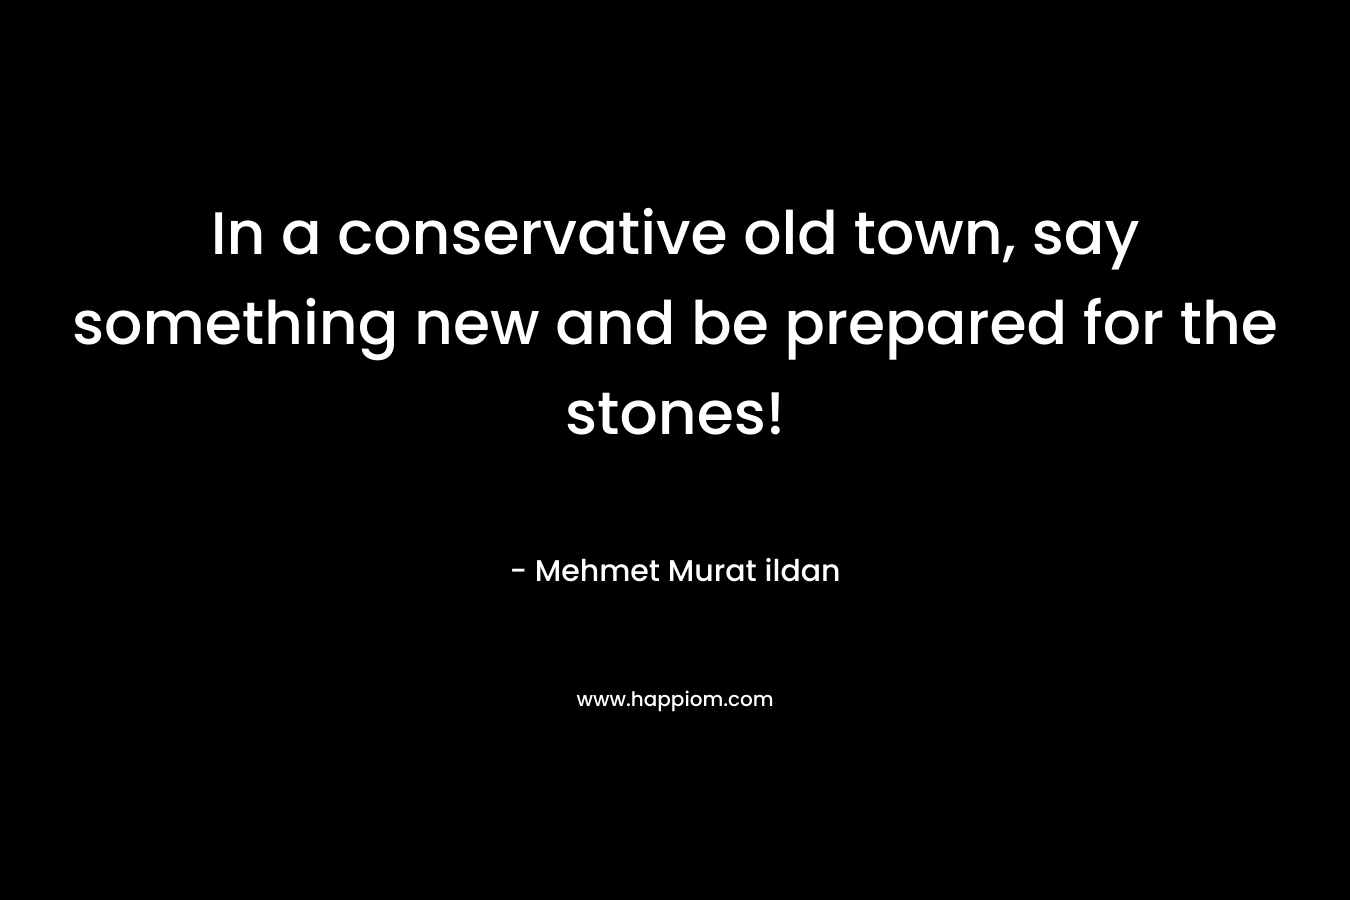 In a conservative old town, say something new and be prepared for the stones!